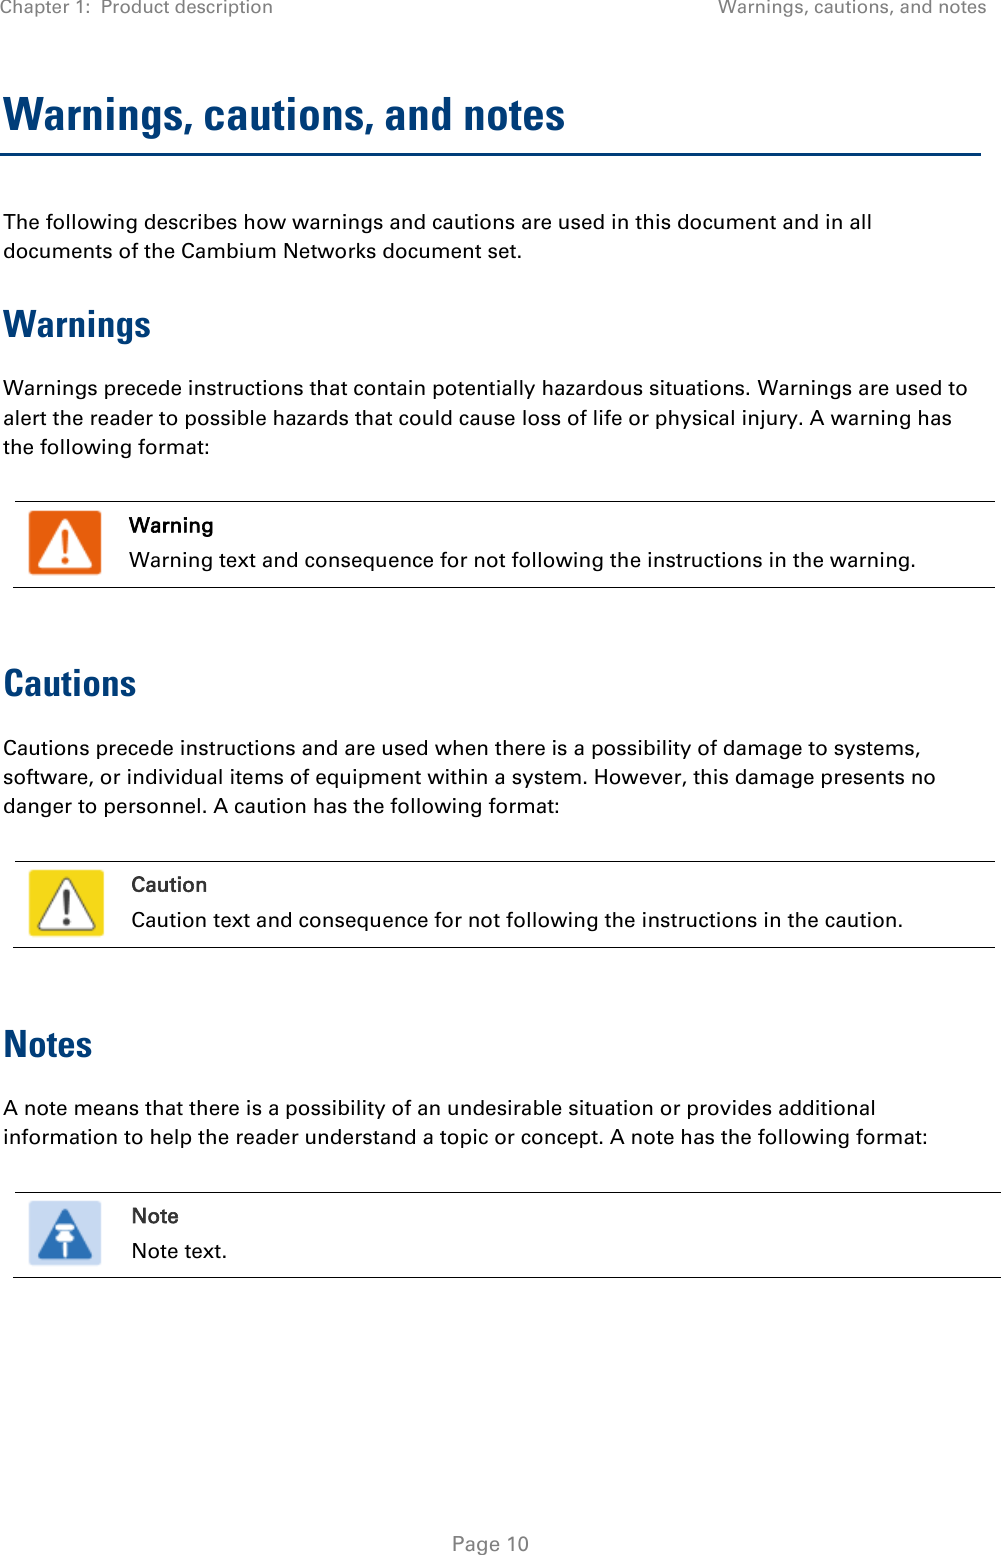 Chapter 1:  Product description Warnings, cautions, and notes   Page 10 Warnings, cautions, and notes The following describes how warnings and cautions are used in this document and in all documents of the Cambium Networks document set. Warnings Warnings precede instructions that contain potentially hazardous situations. Warnings are used to alert the reader to possible hazards that could cause loss of life or physical injury. A warning has the following format:   Warning Warning text and consequence for not following the instructions in the warning.  Cautions Cautions precede instructions and are used when there is a possibility of damage to systems, software, or individual items of equipment within a system. However, this damage presents no danger to personnel. A caution has the following format:   Caution Caution text and consequence for not following the instructions in the caution.  Notes A note means that there is a possibility of an undesirable situation or provides additional information to help the reader understand a topic or concept. A note has the following format:   Note Note text.   